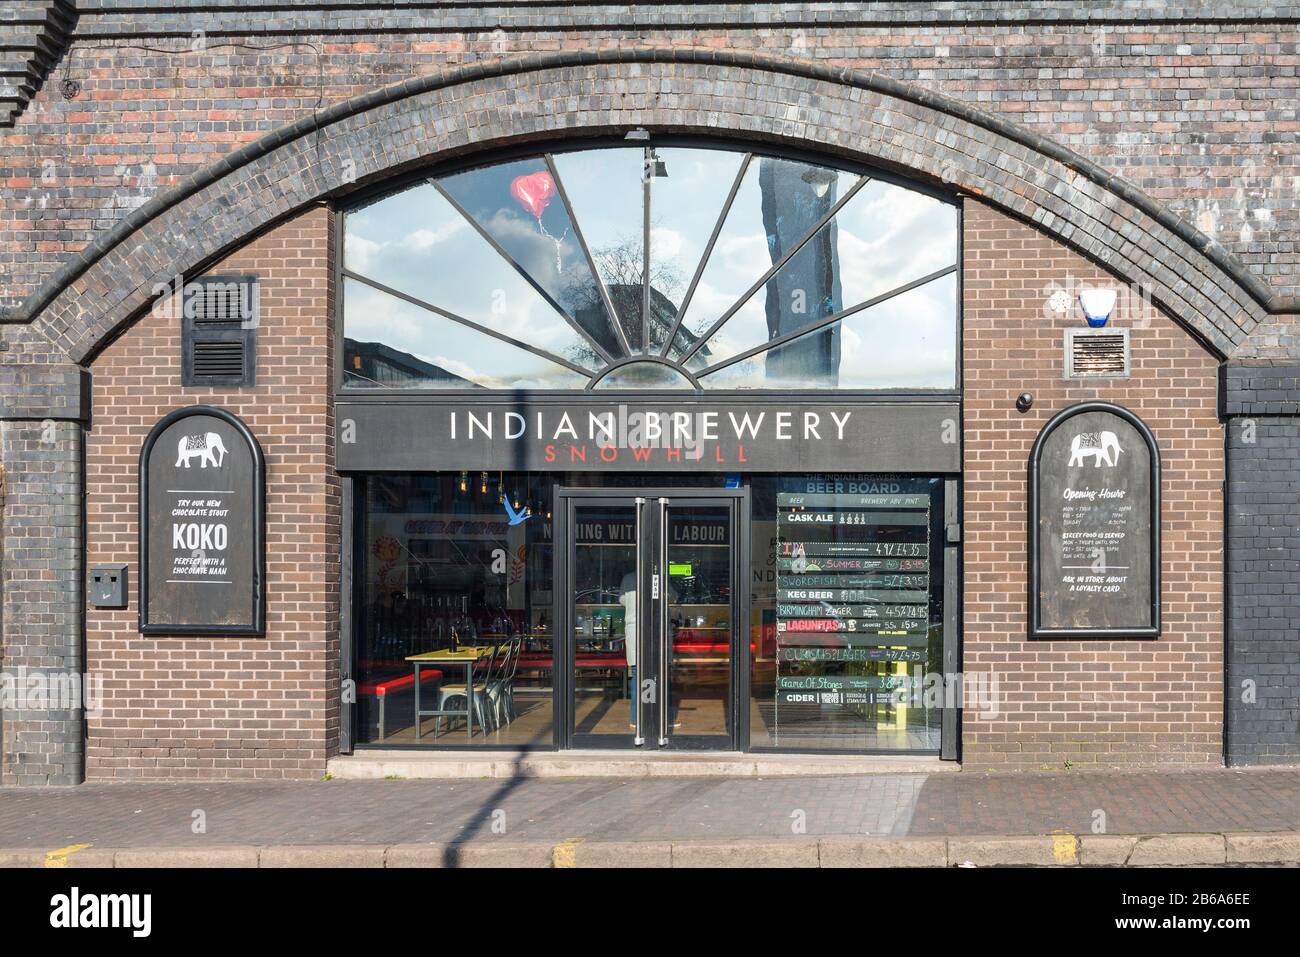 The Indian Brewery in railway arches on Livery Street in Birmingham City Centre, UK serves indian street food and craft beer Stock Photo